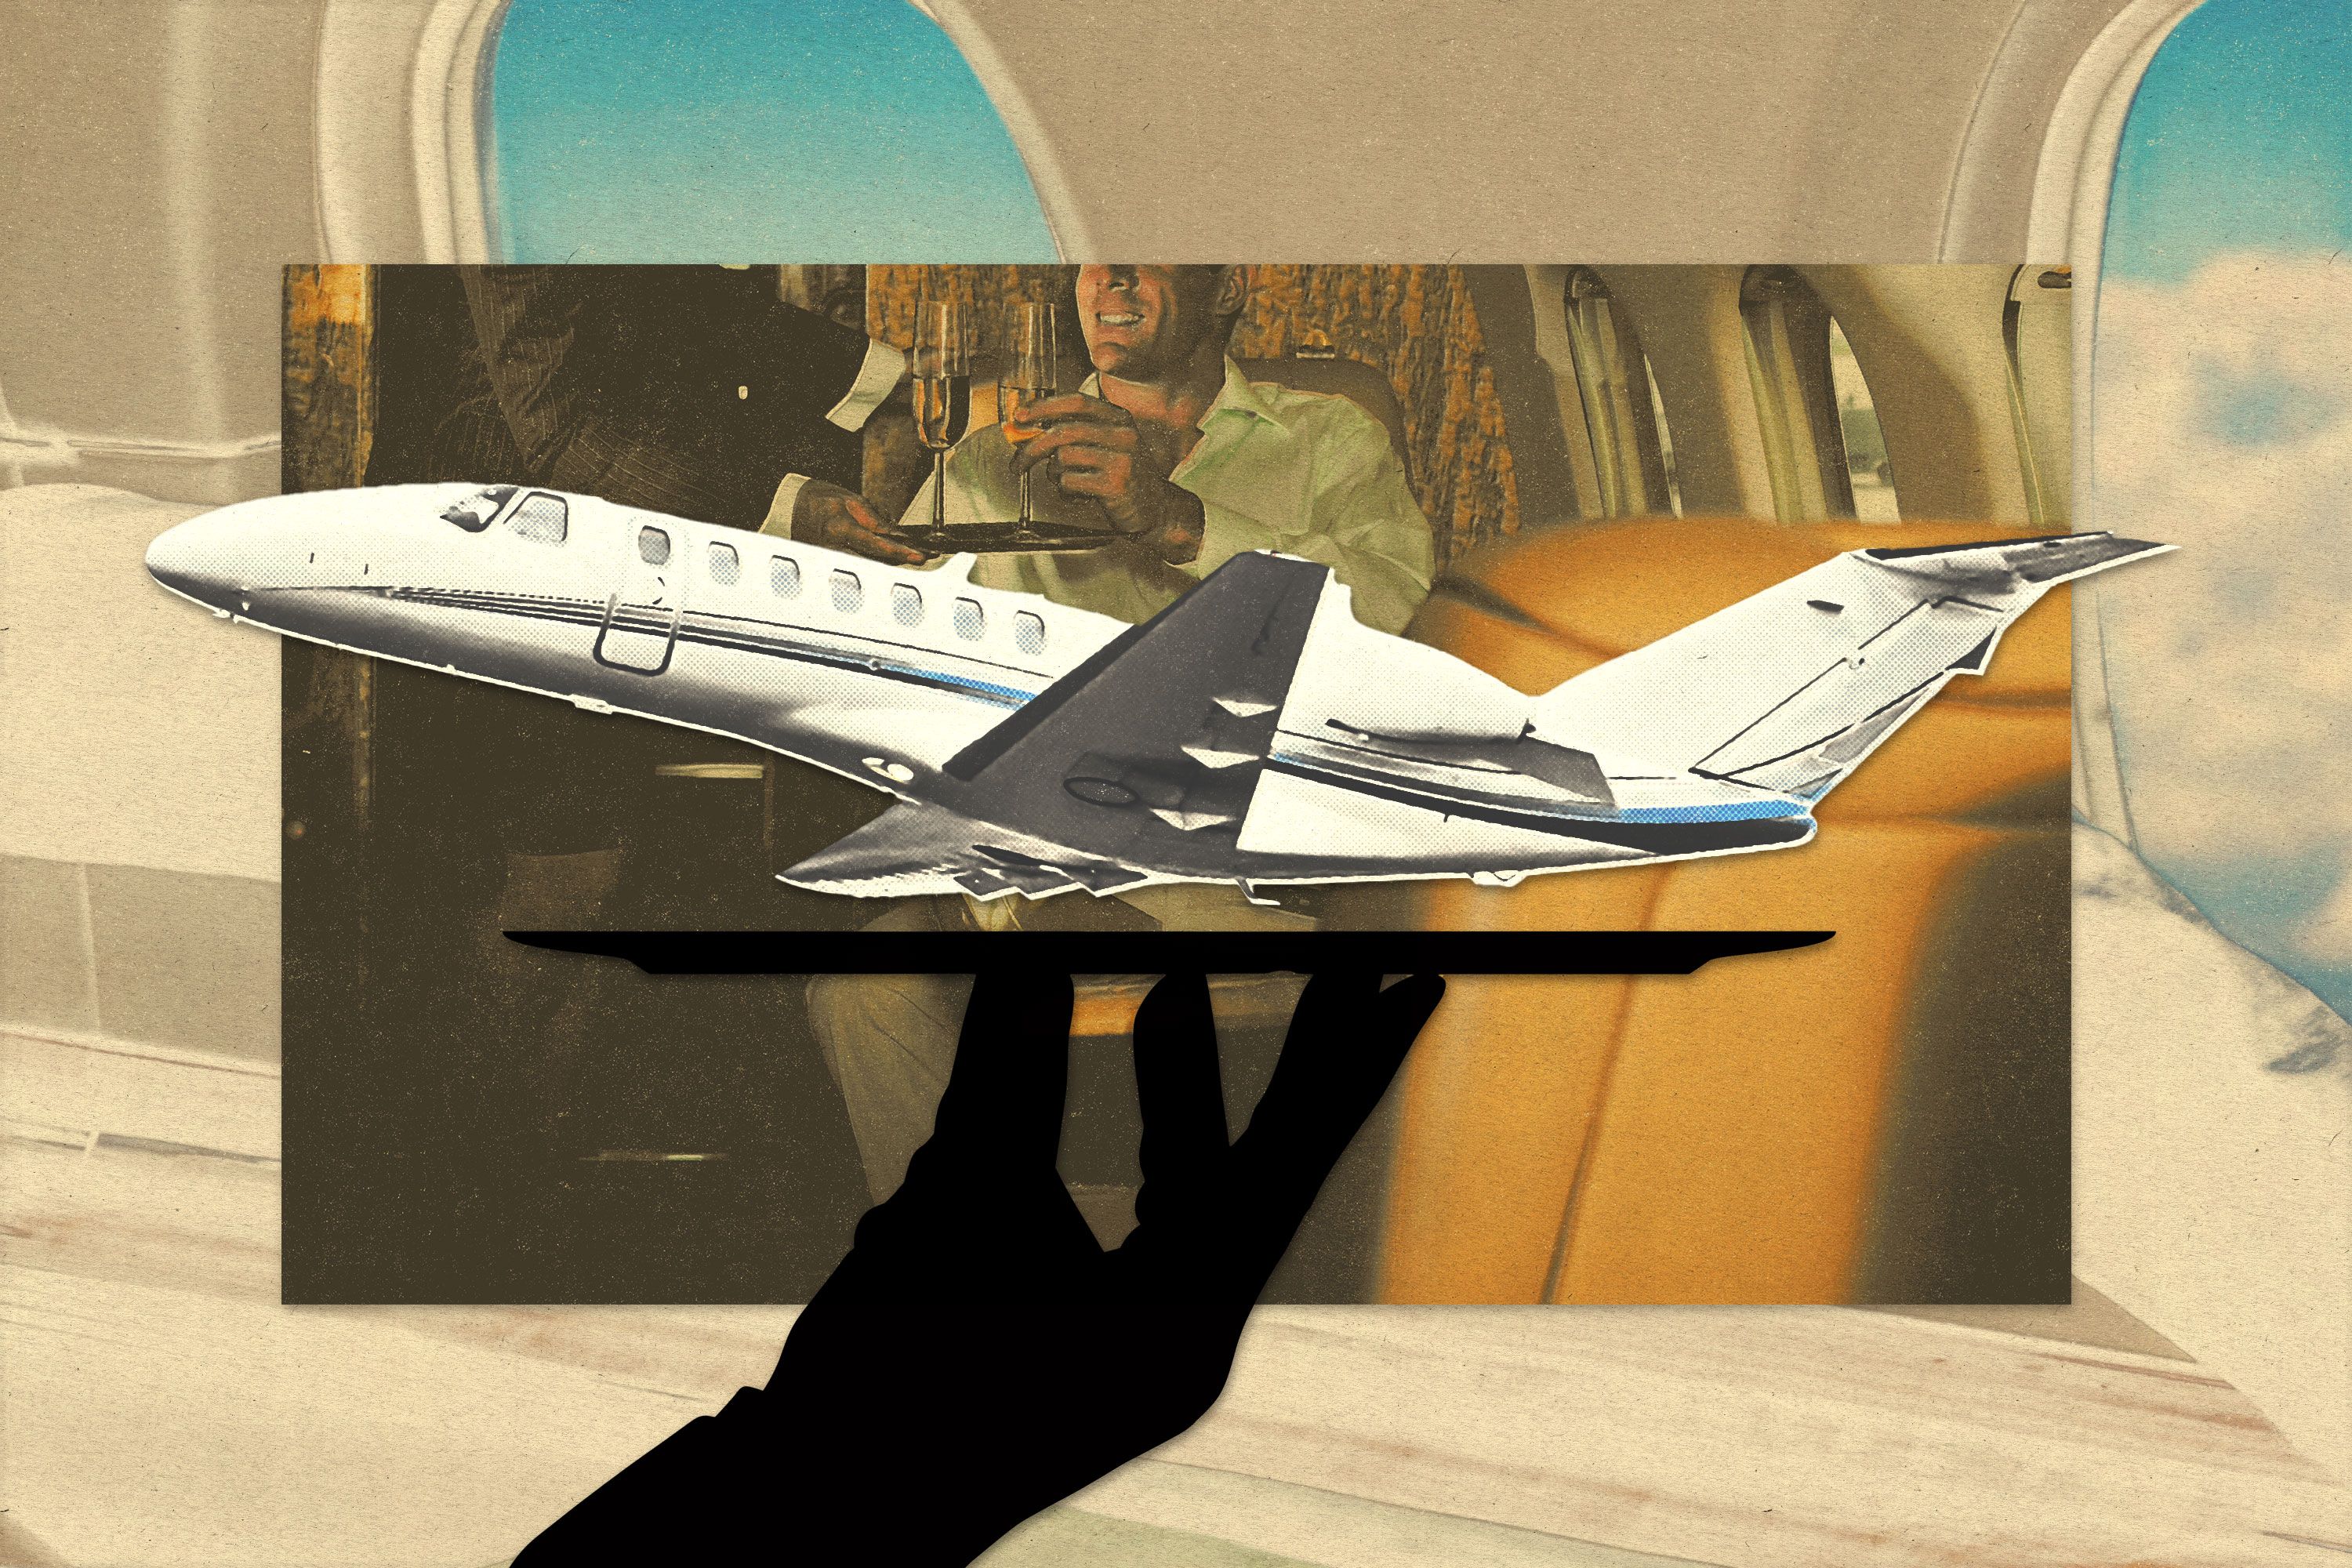 What It's Really Like to Fly on a Private Jet